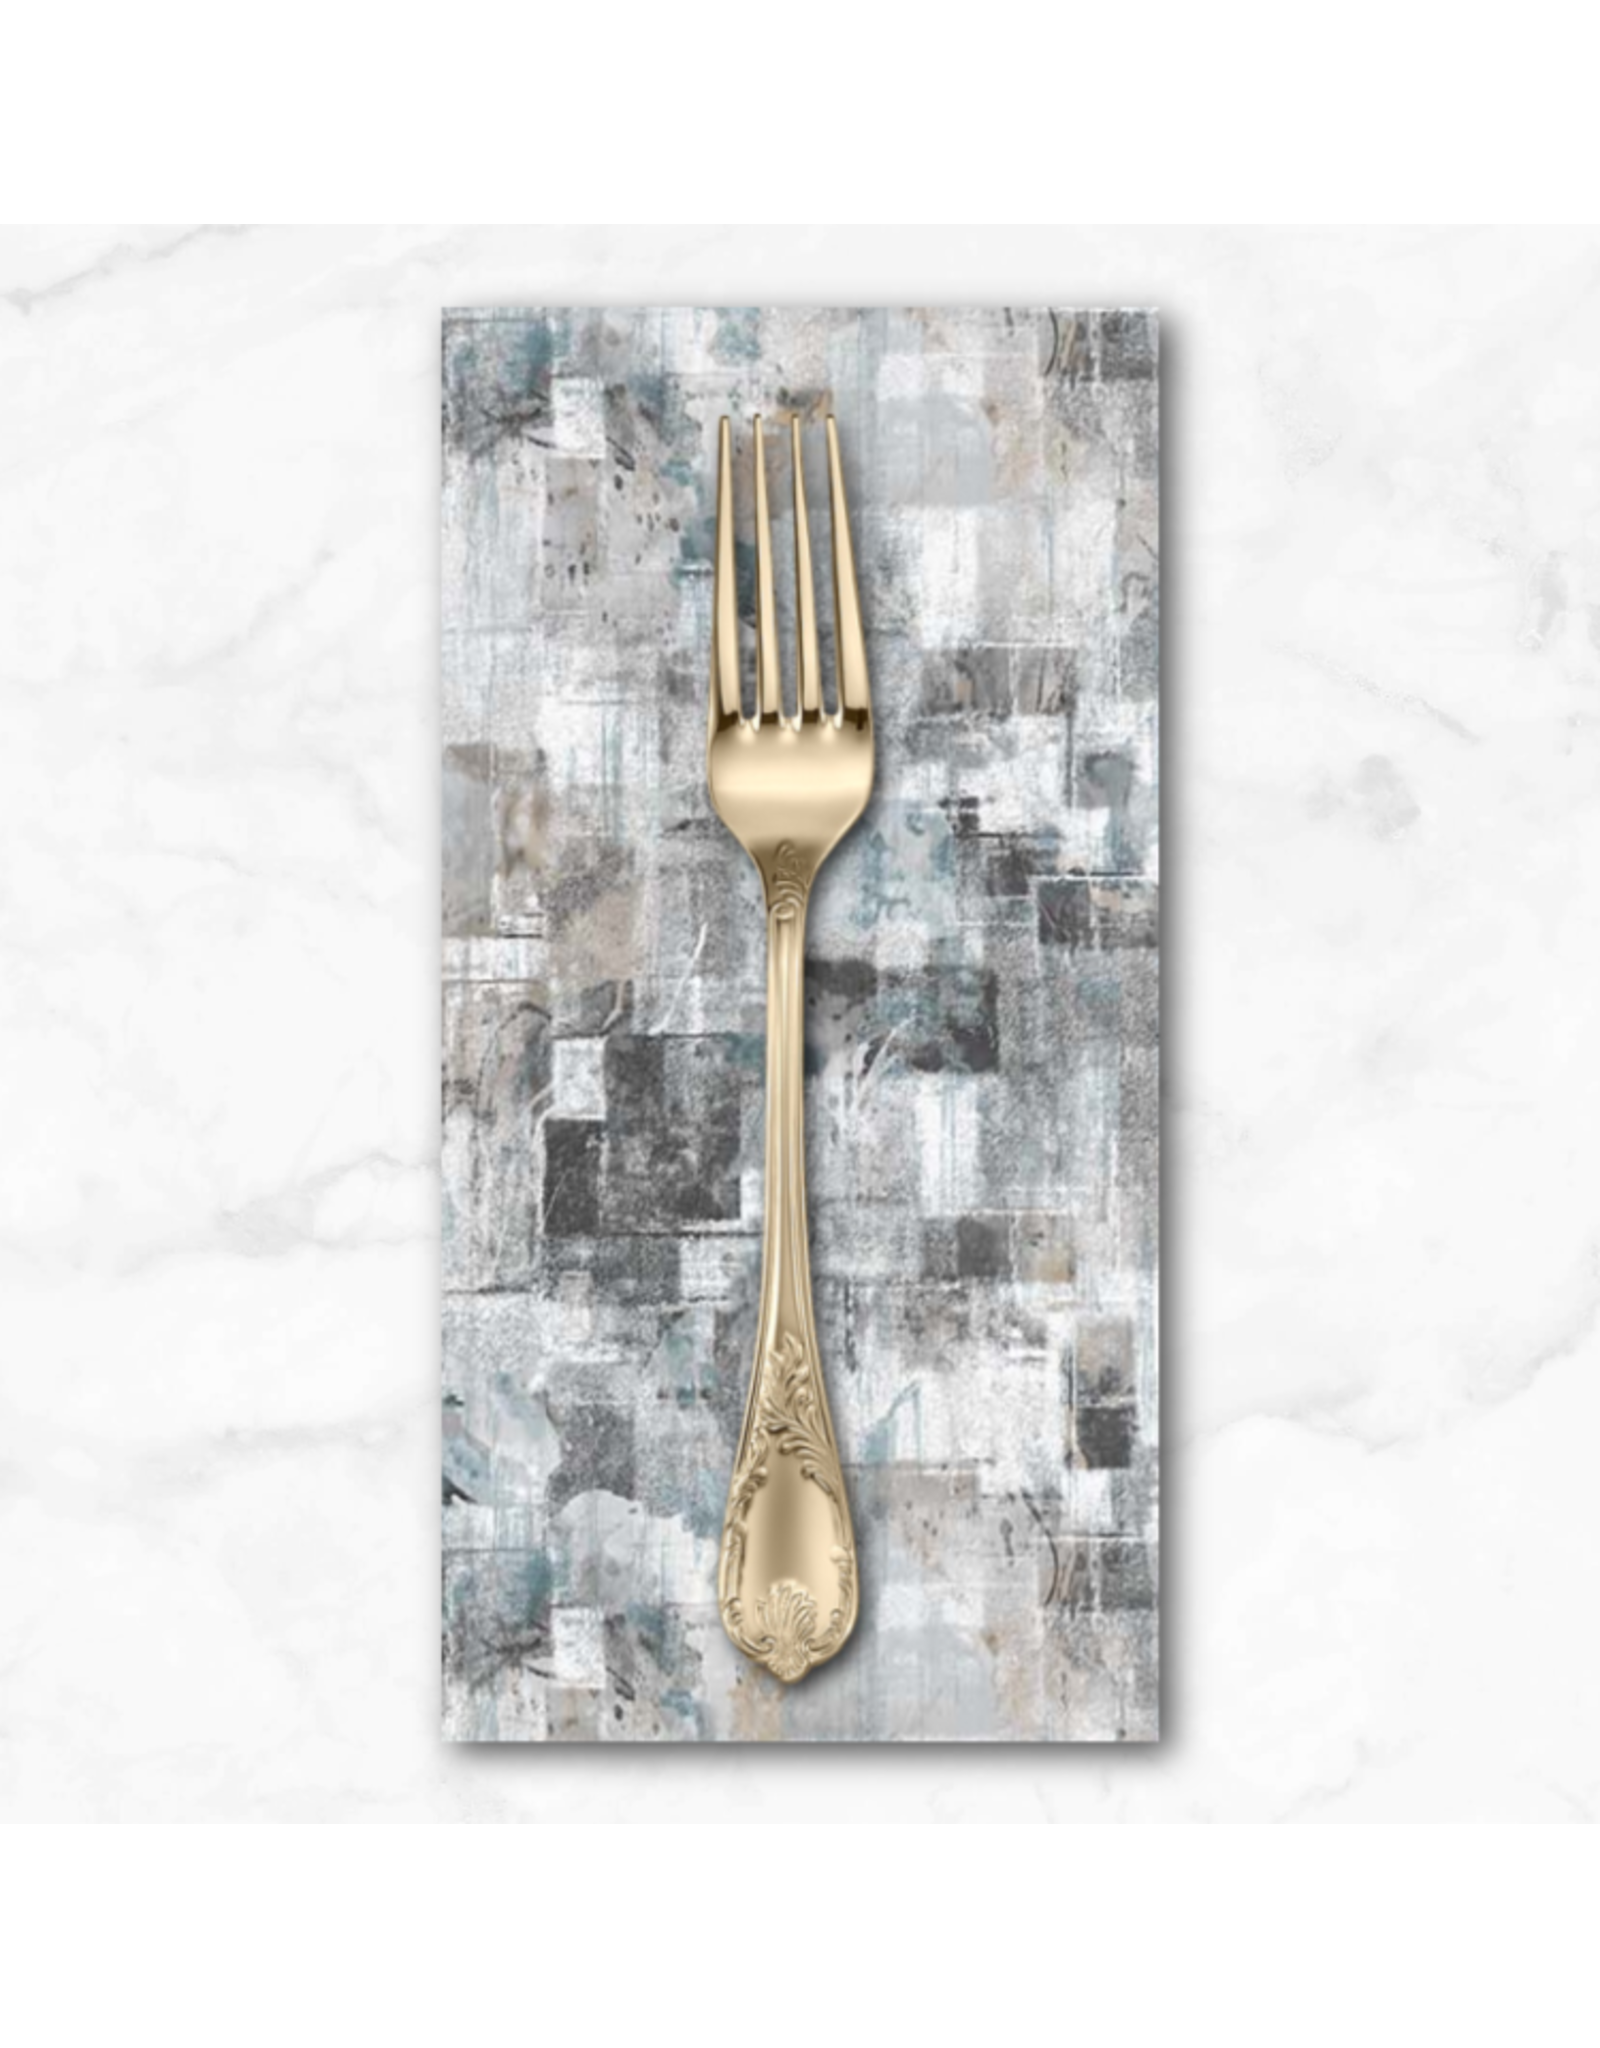 PD's Northcott Collection City Lights, Large Textured Blocks in Light Gray, Dinner Napkin